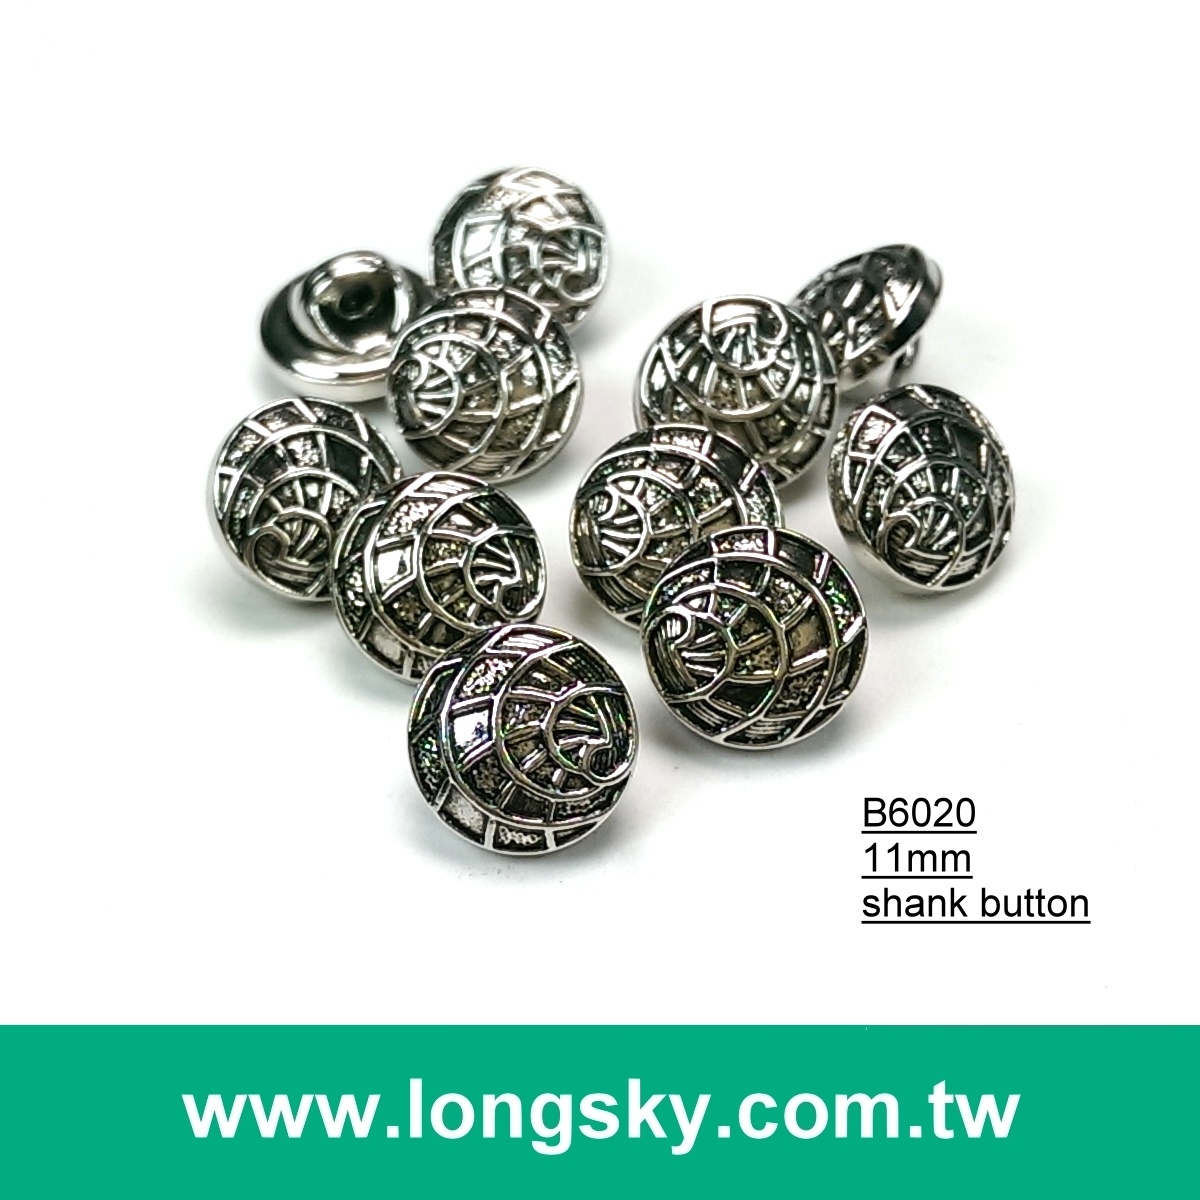 (#B6020/11mm) 17L gold plated with black metal looked small buttons for crafts from Taiwan